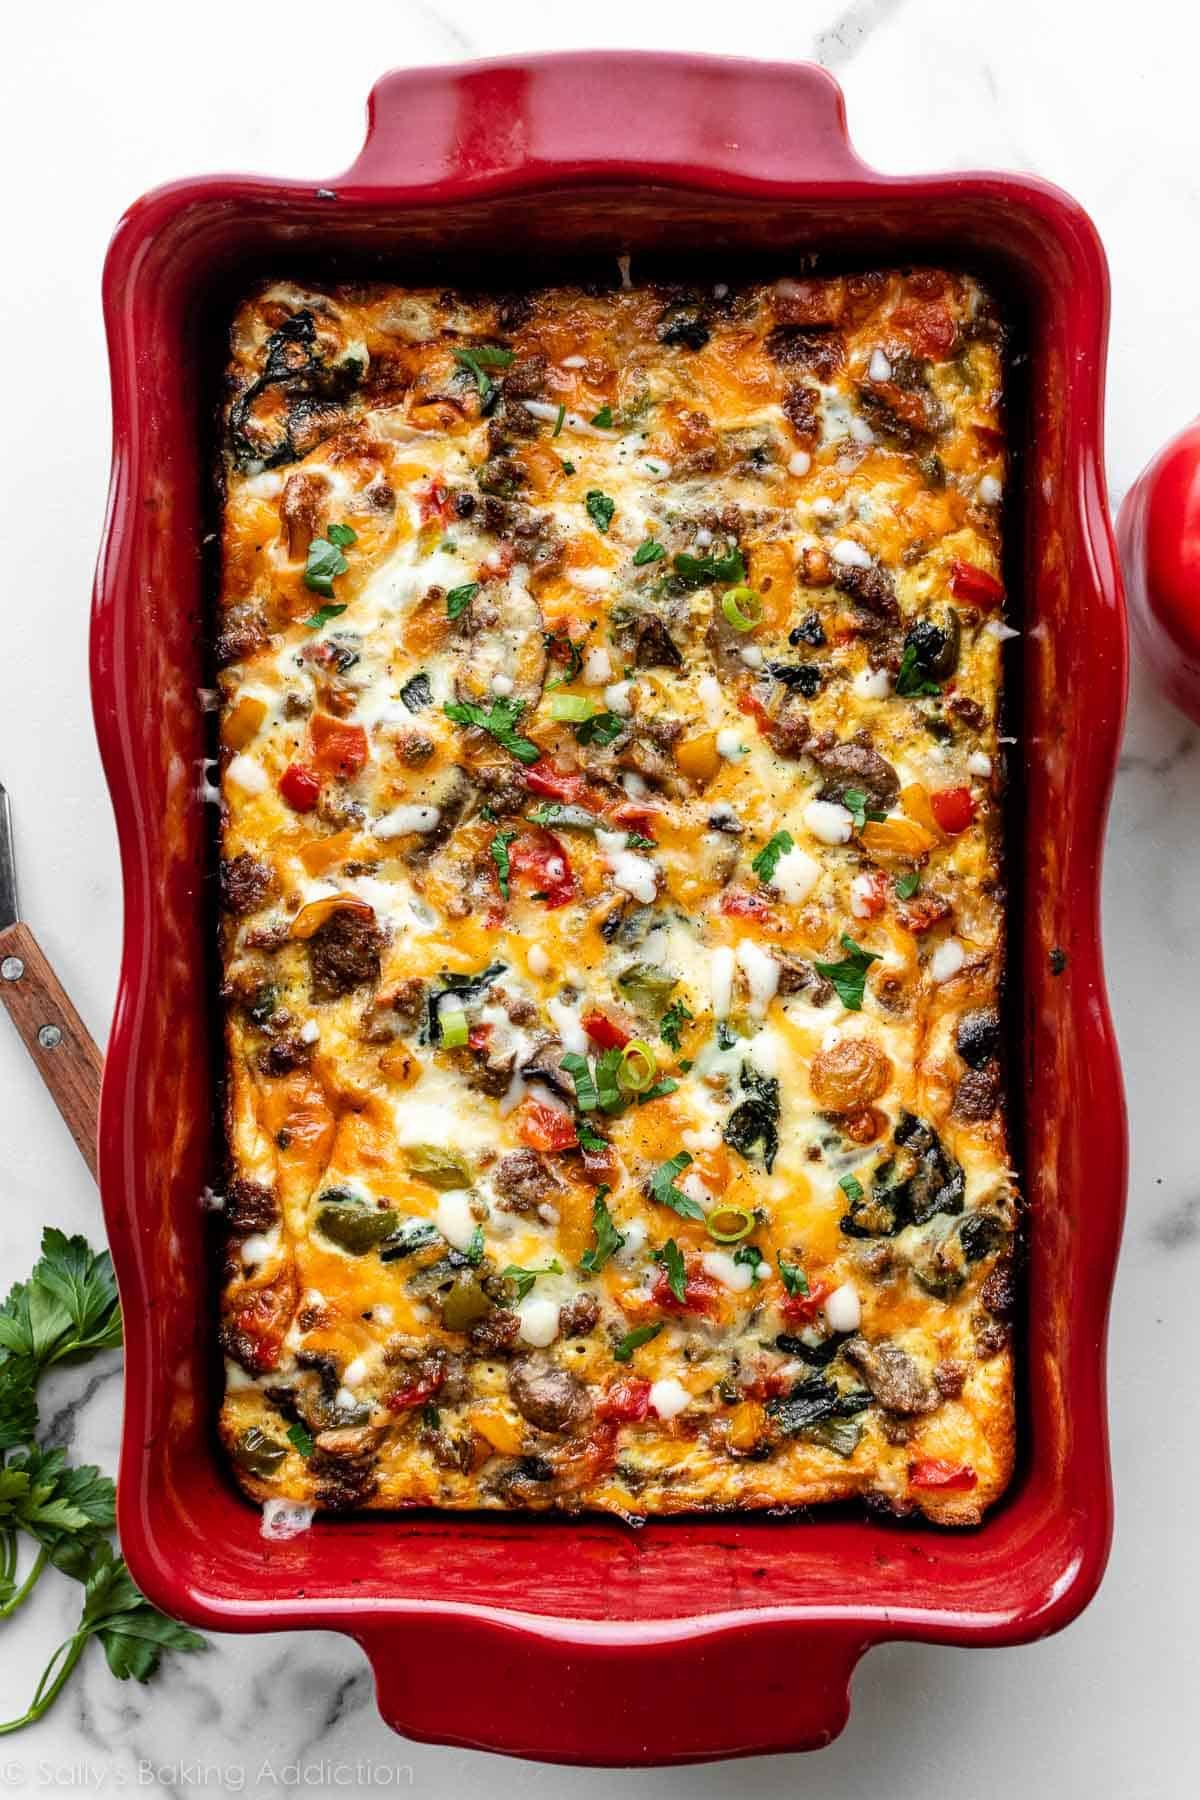 baked egg cheese and sausage breakfast casserole in red casserole dish.